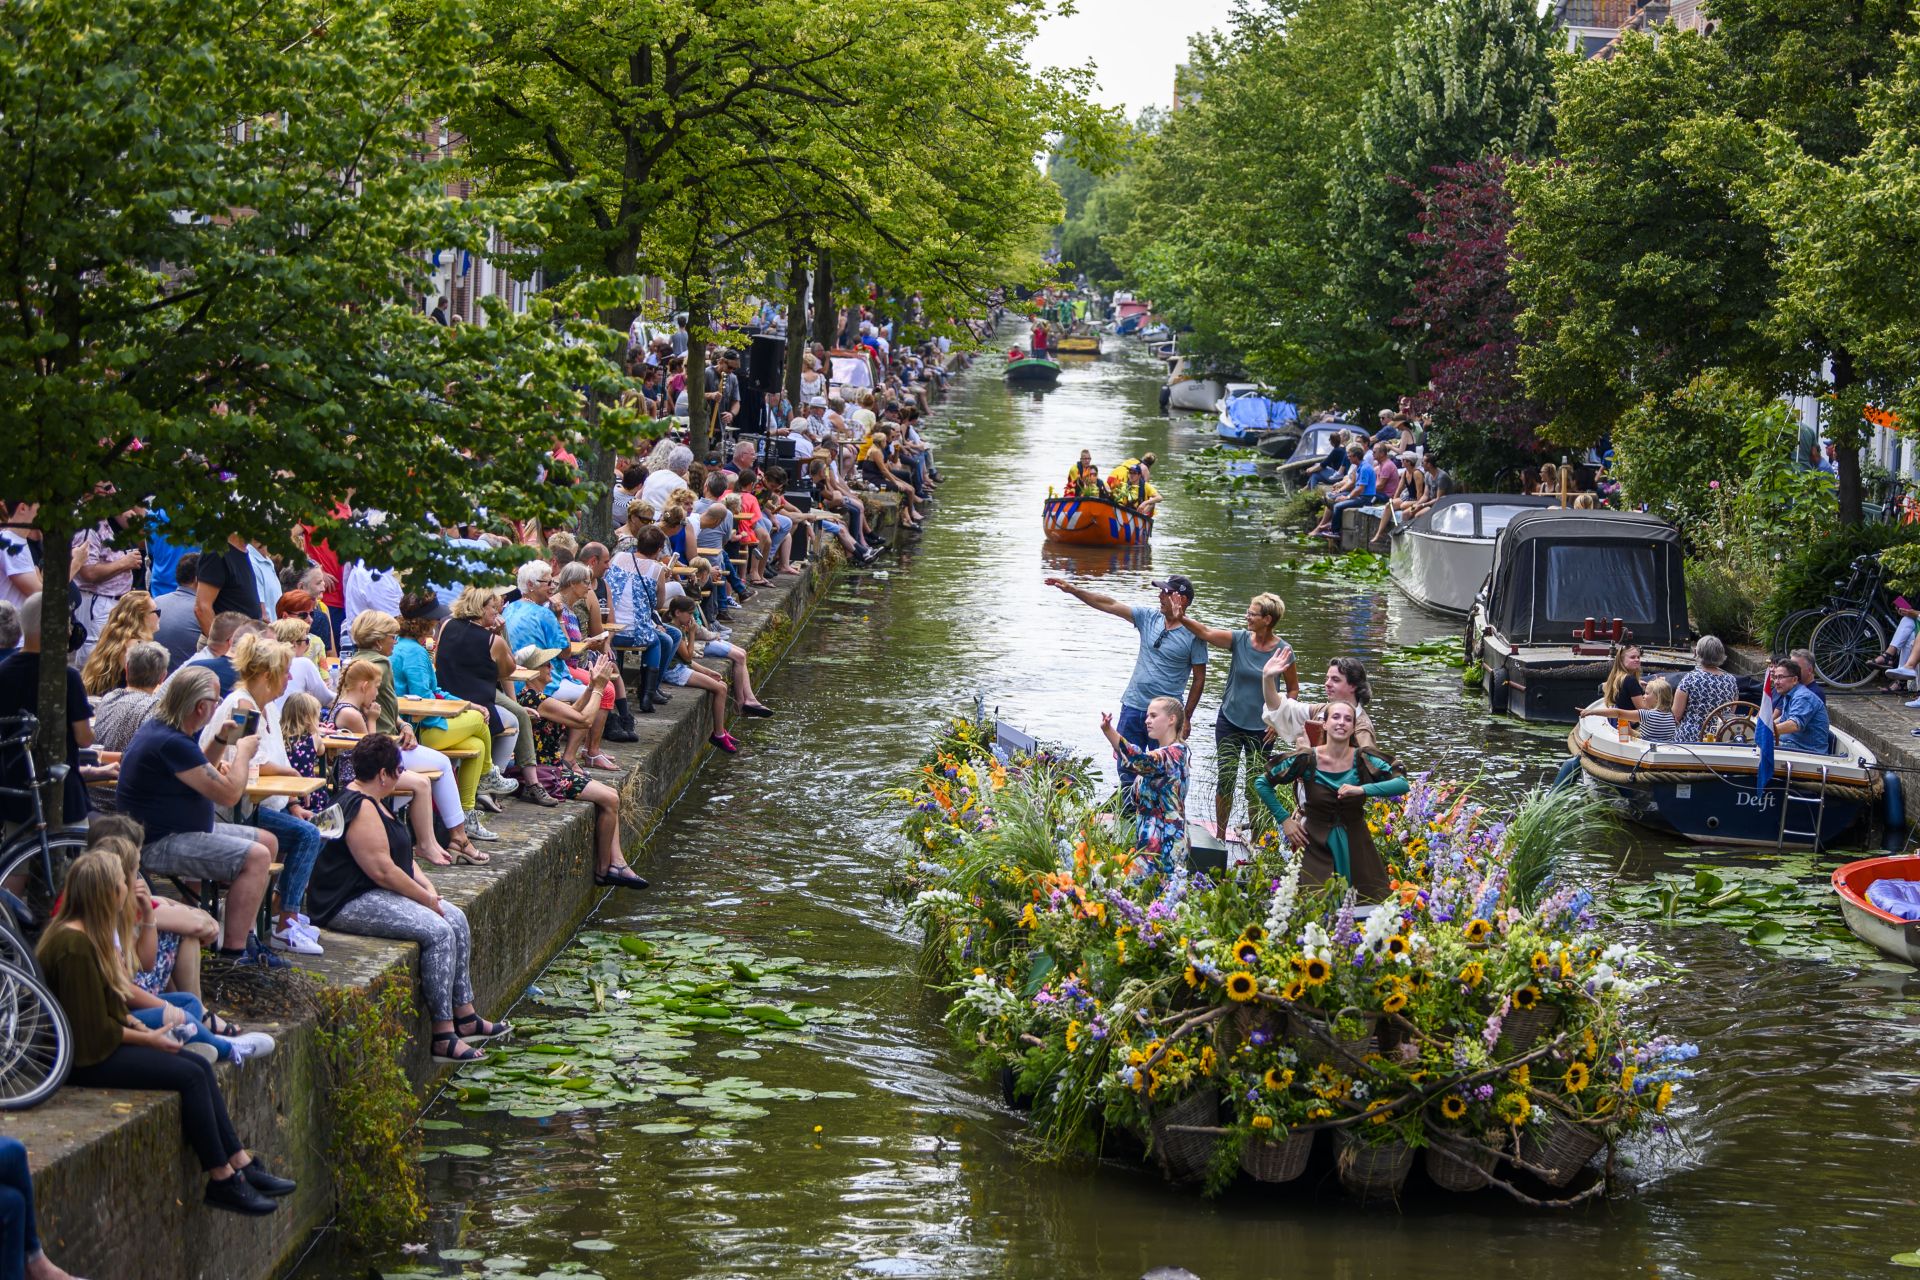 Float featuring a performance by a children's theatre company for children in Delft